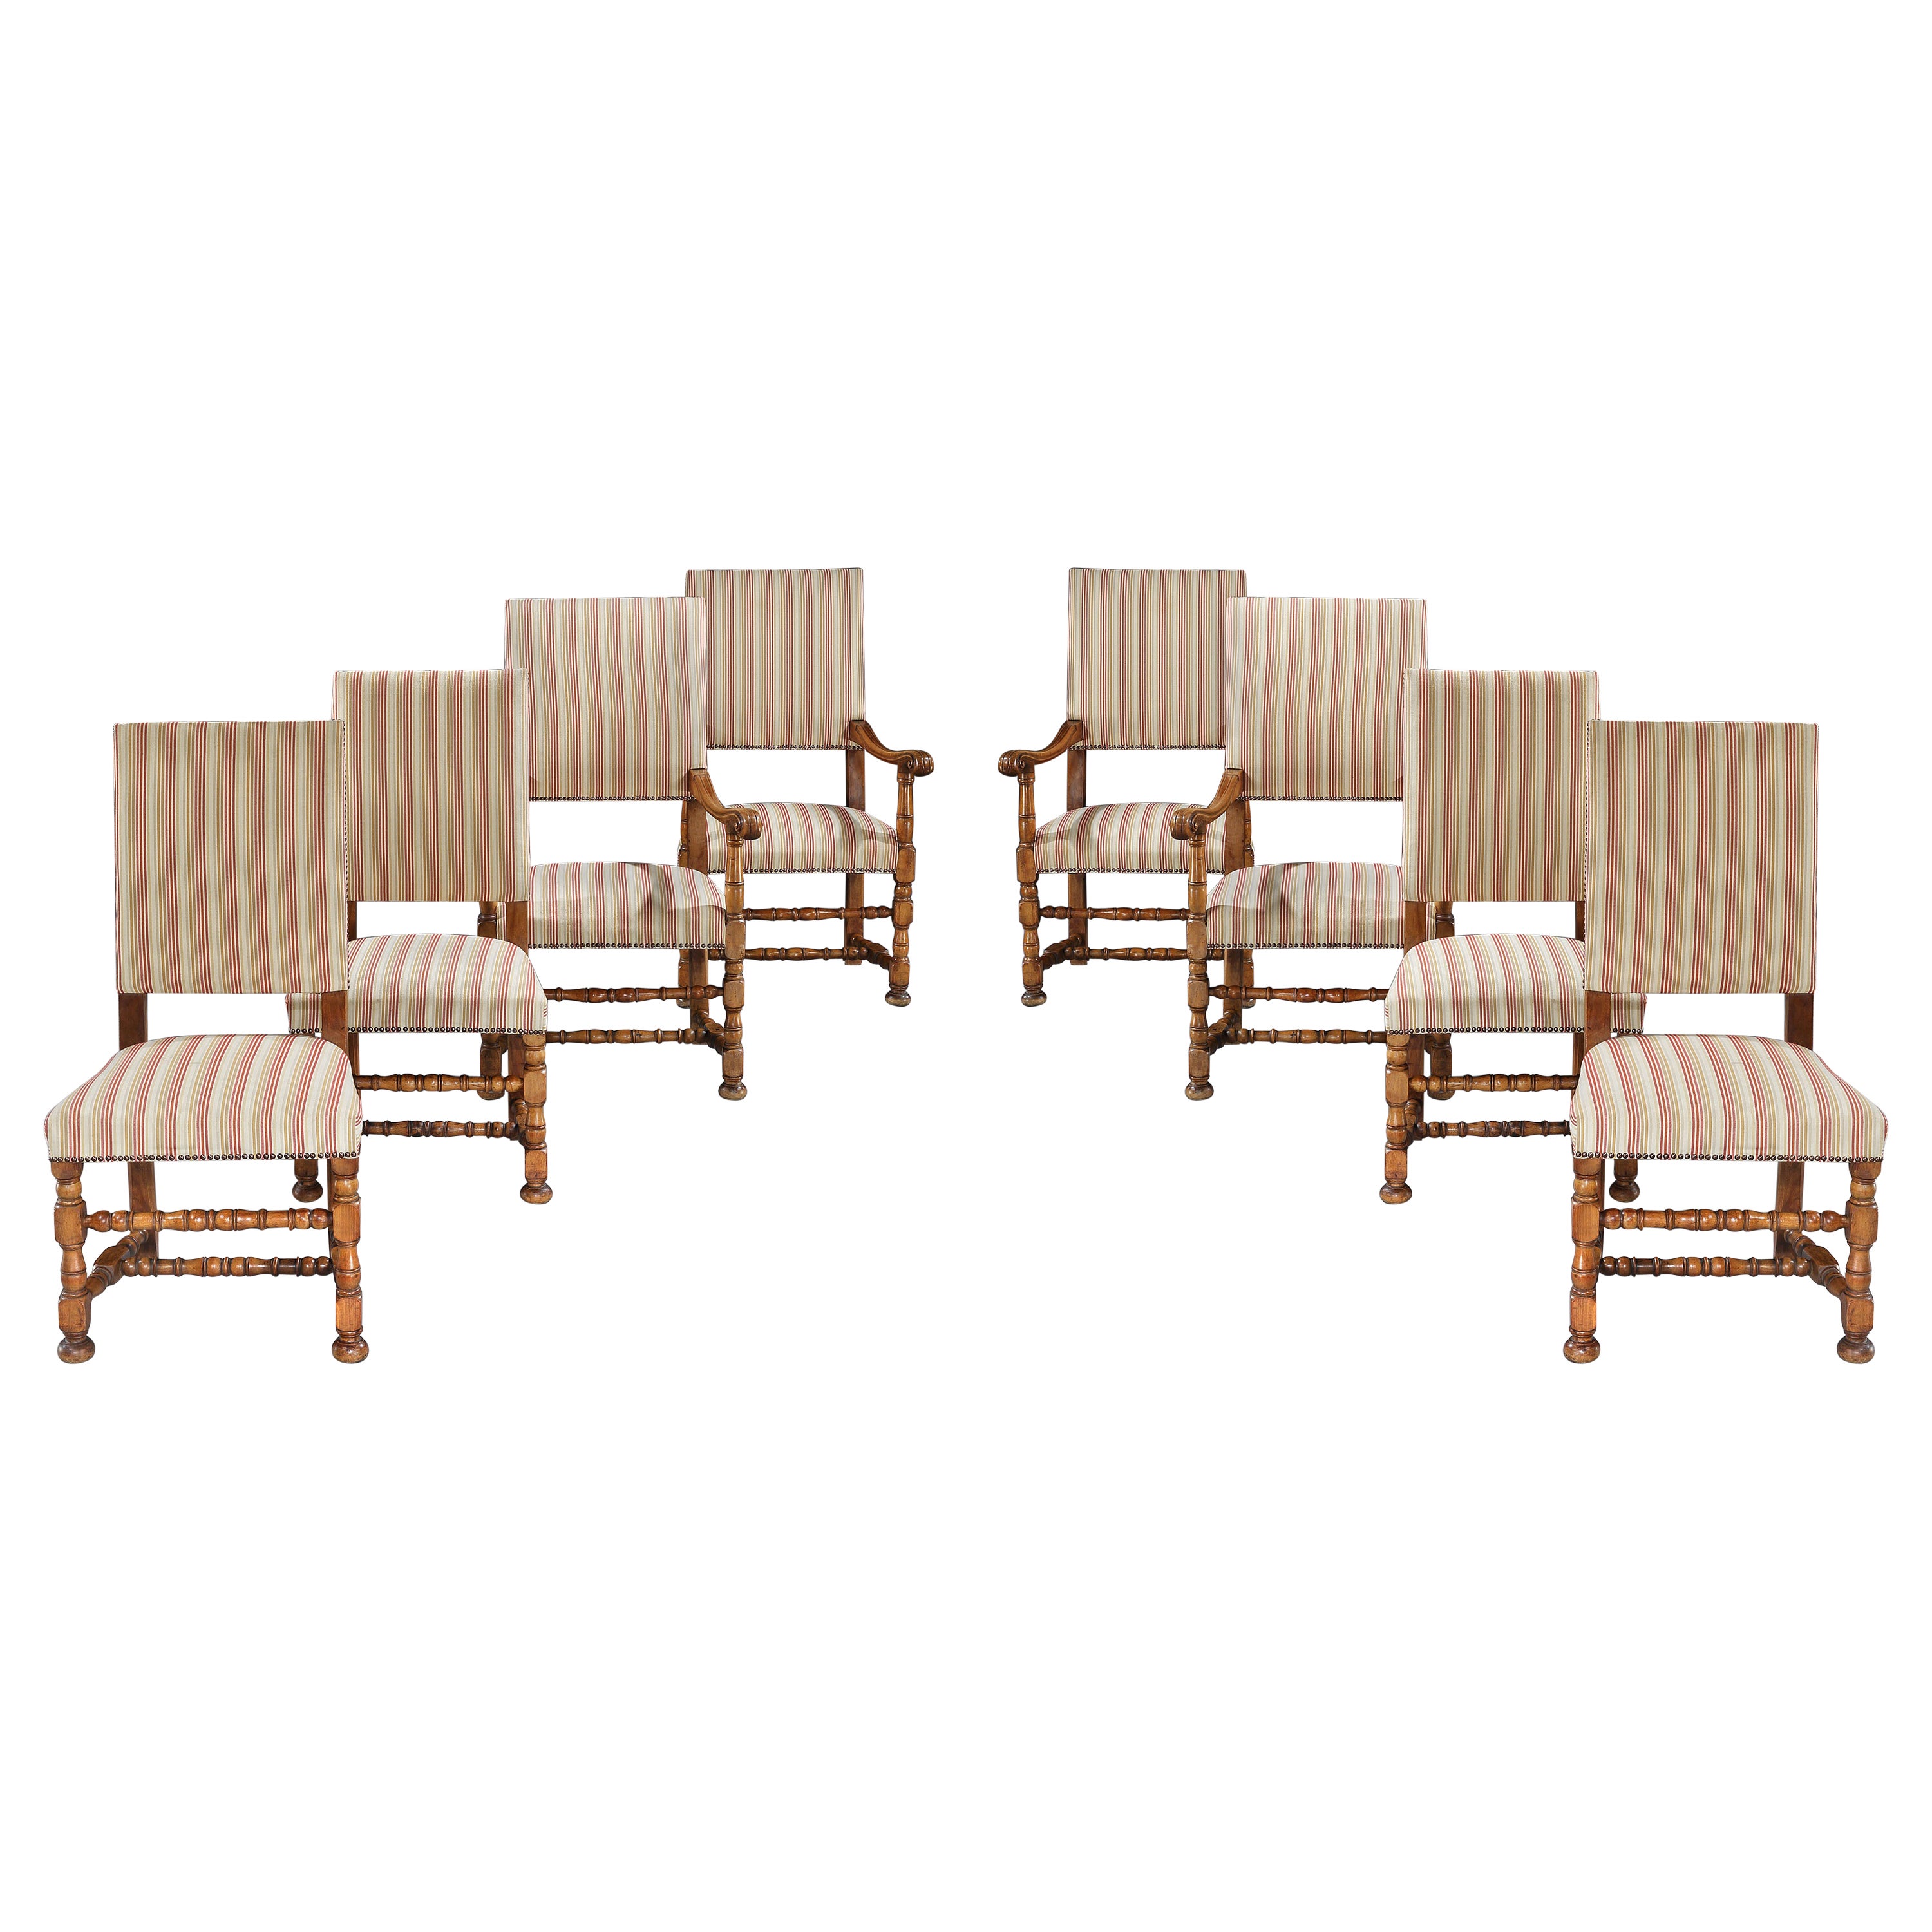 8 Set Armchairs Chairs Upholstered Fruitwood 19 Century Louis XIV Style Stripe For Sale